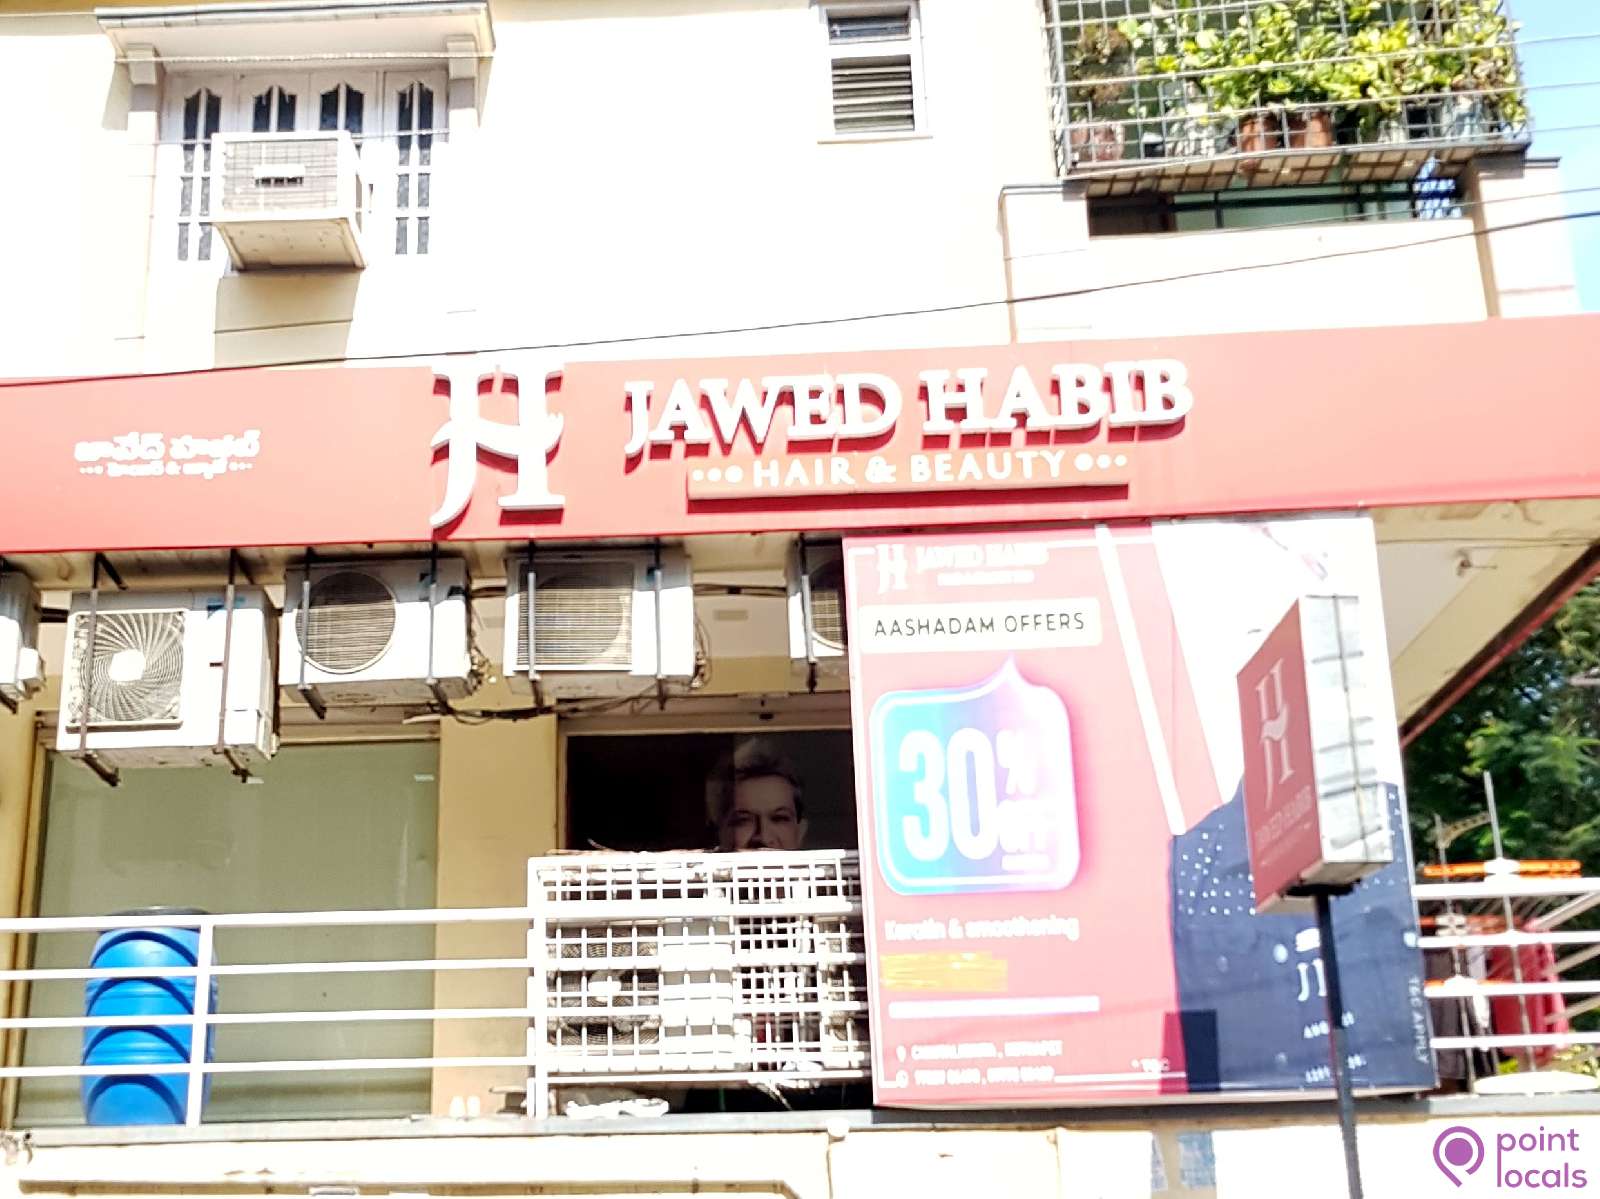 Jawed Habib Hair and Beauty - Jawed Habib Hair and Beauty in Hyderabad,Telangana  | Pointlocals